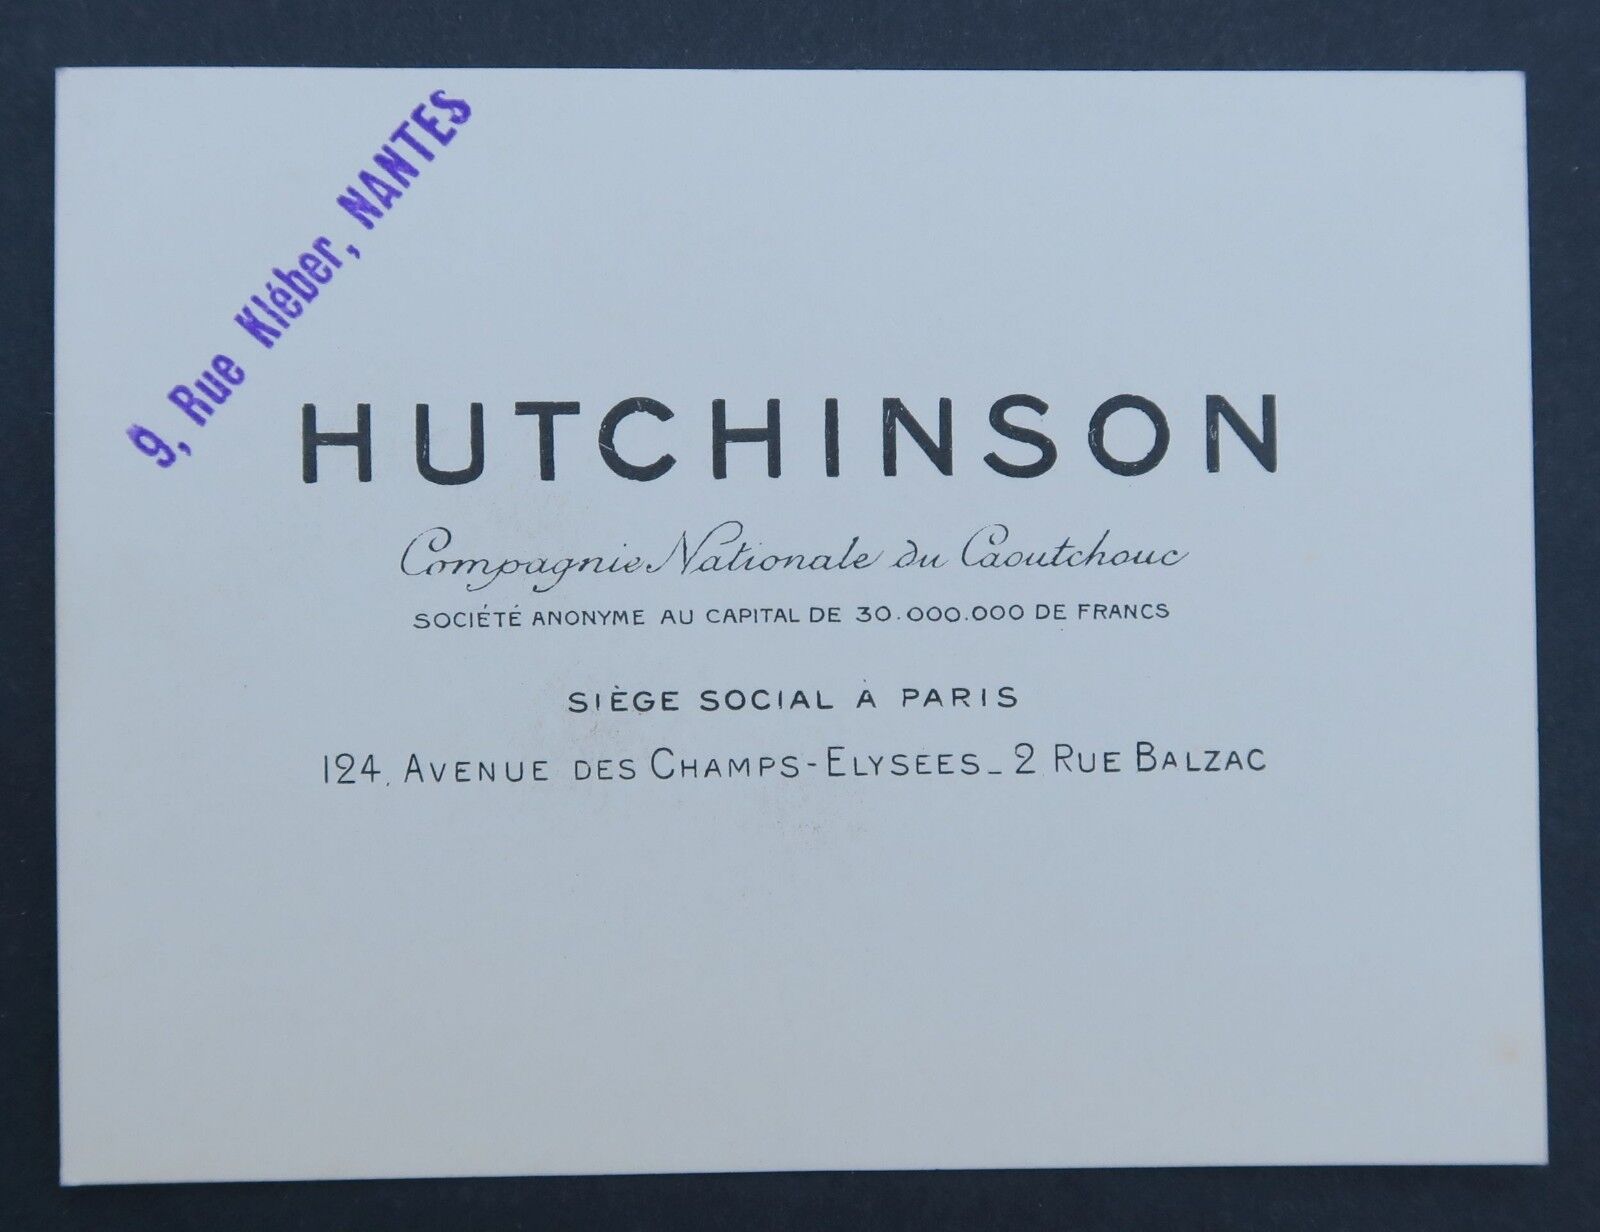 HUTCHINSON business card Michelin tire rubber tyre Nantes old visit card